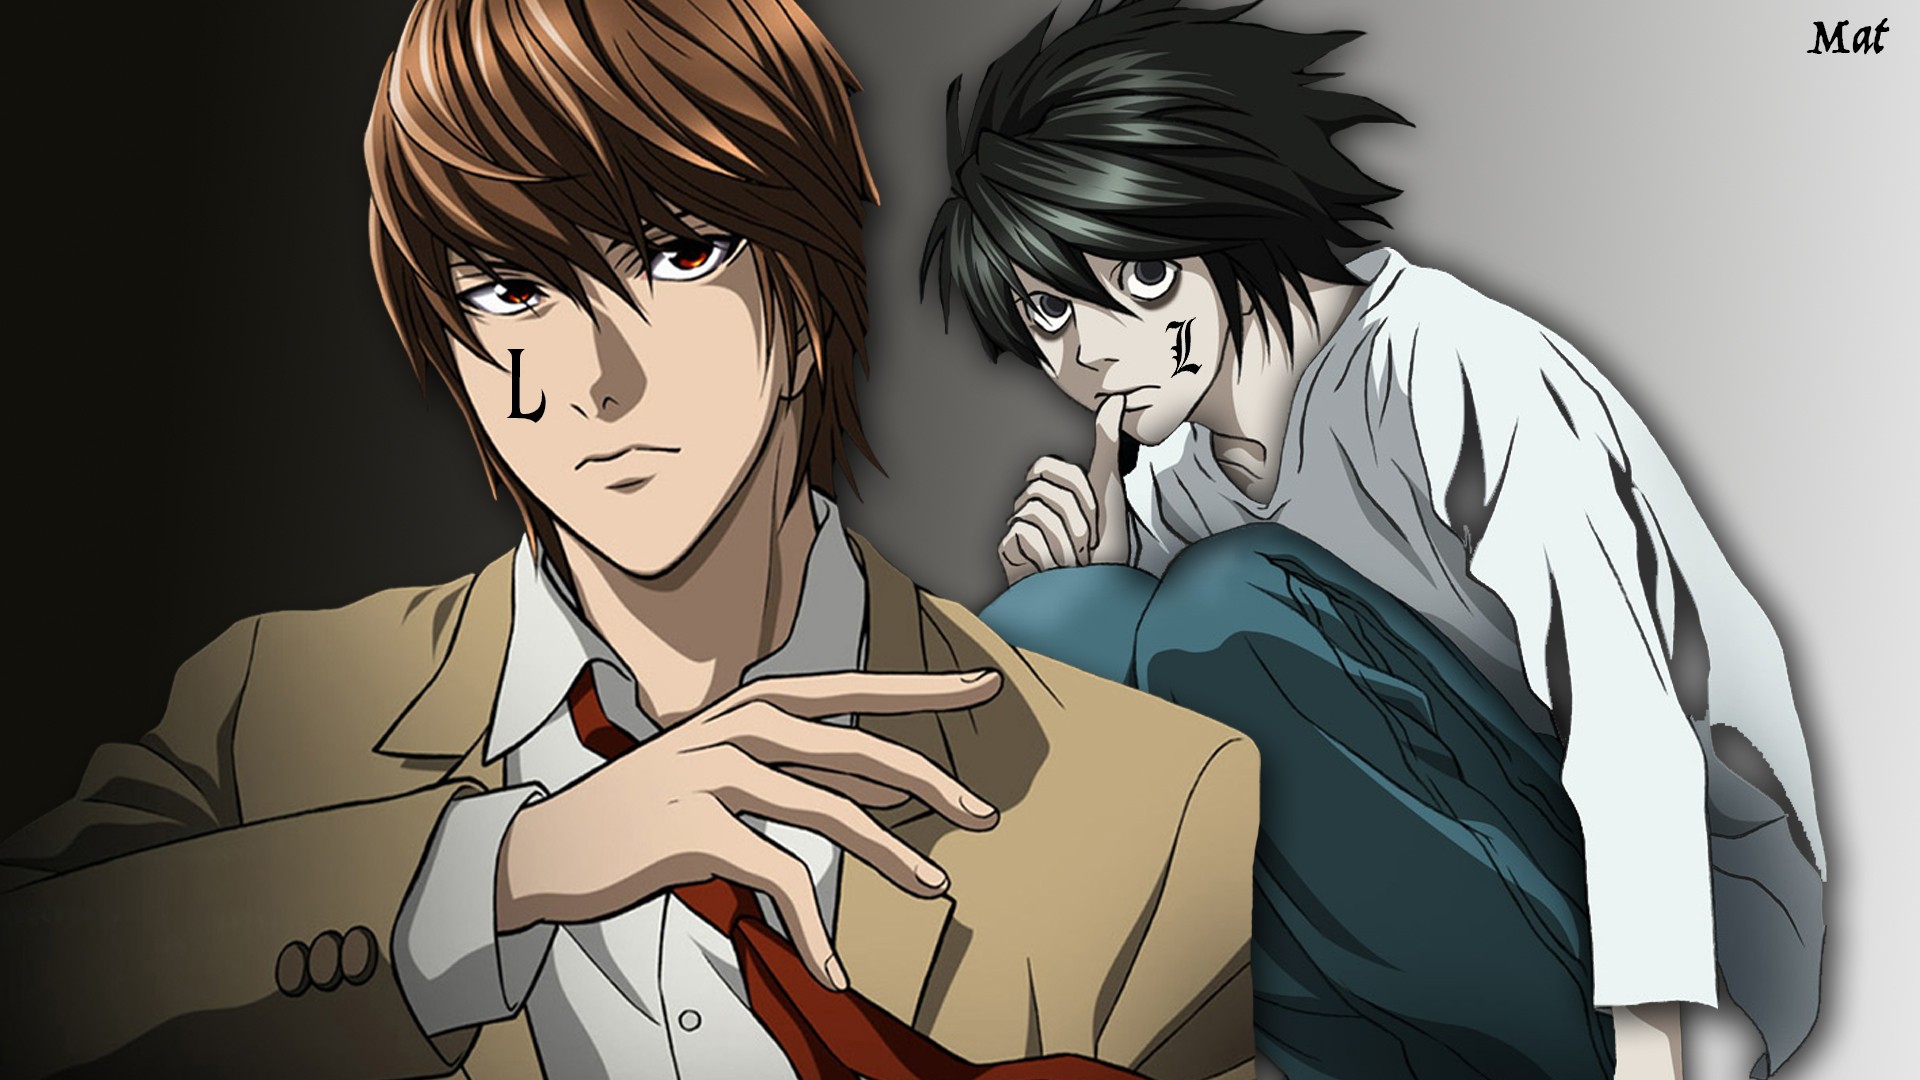 Death Note Yagami Light Lawliet L Anime 1920x1080